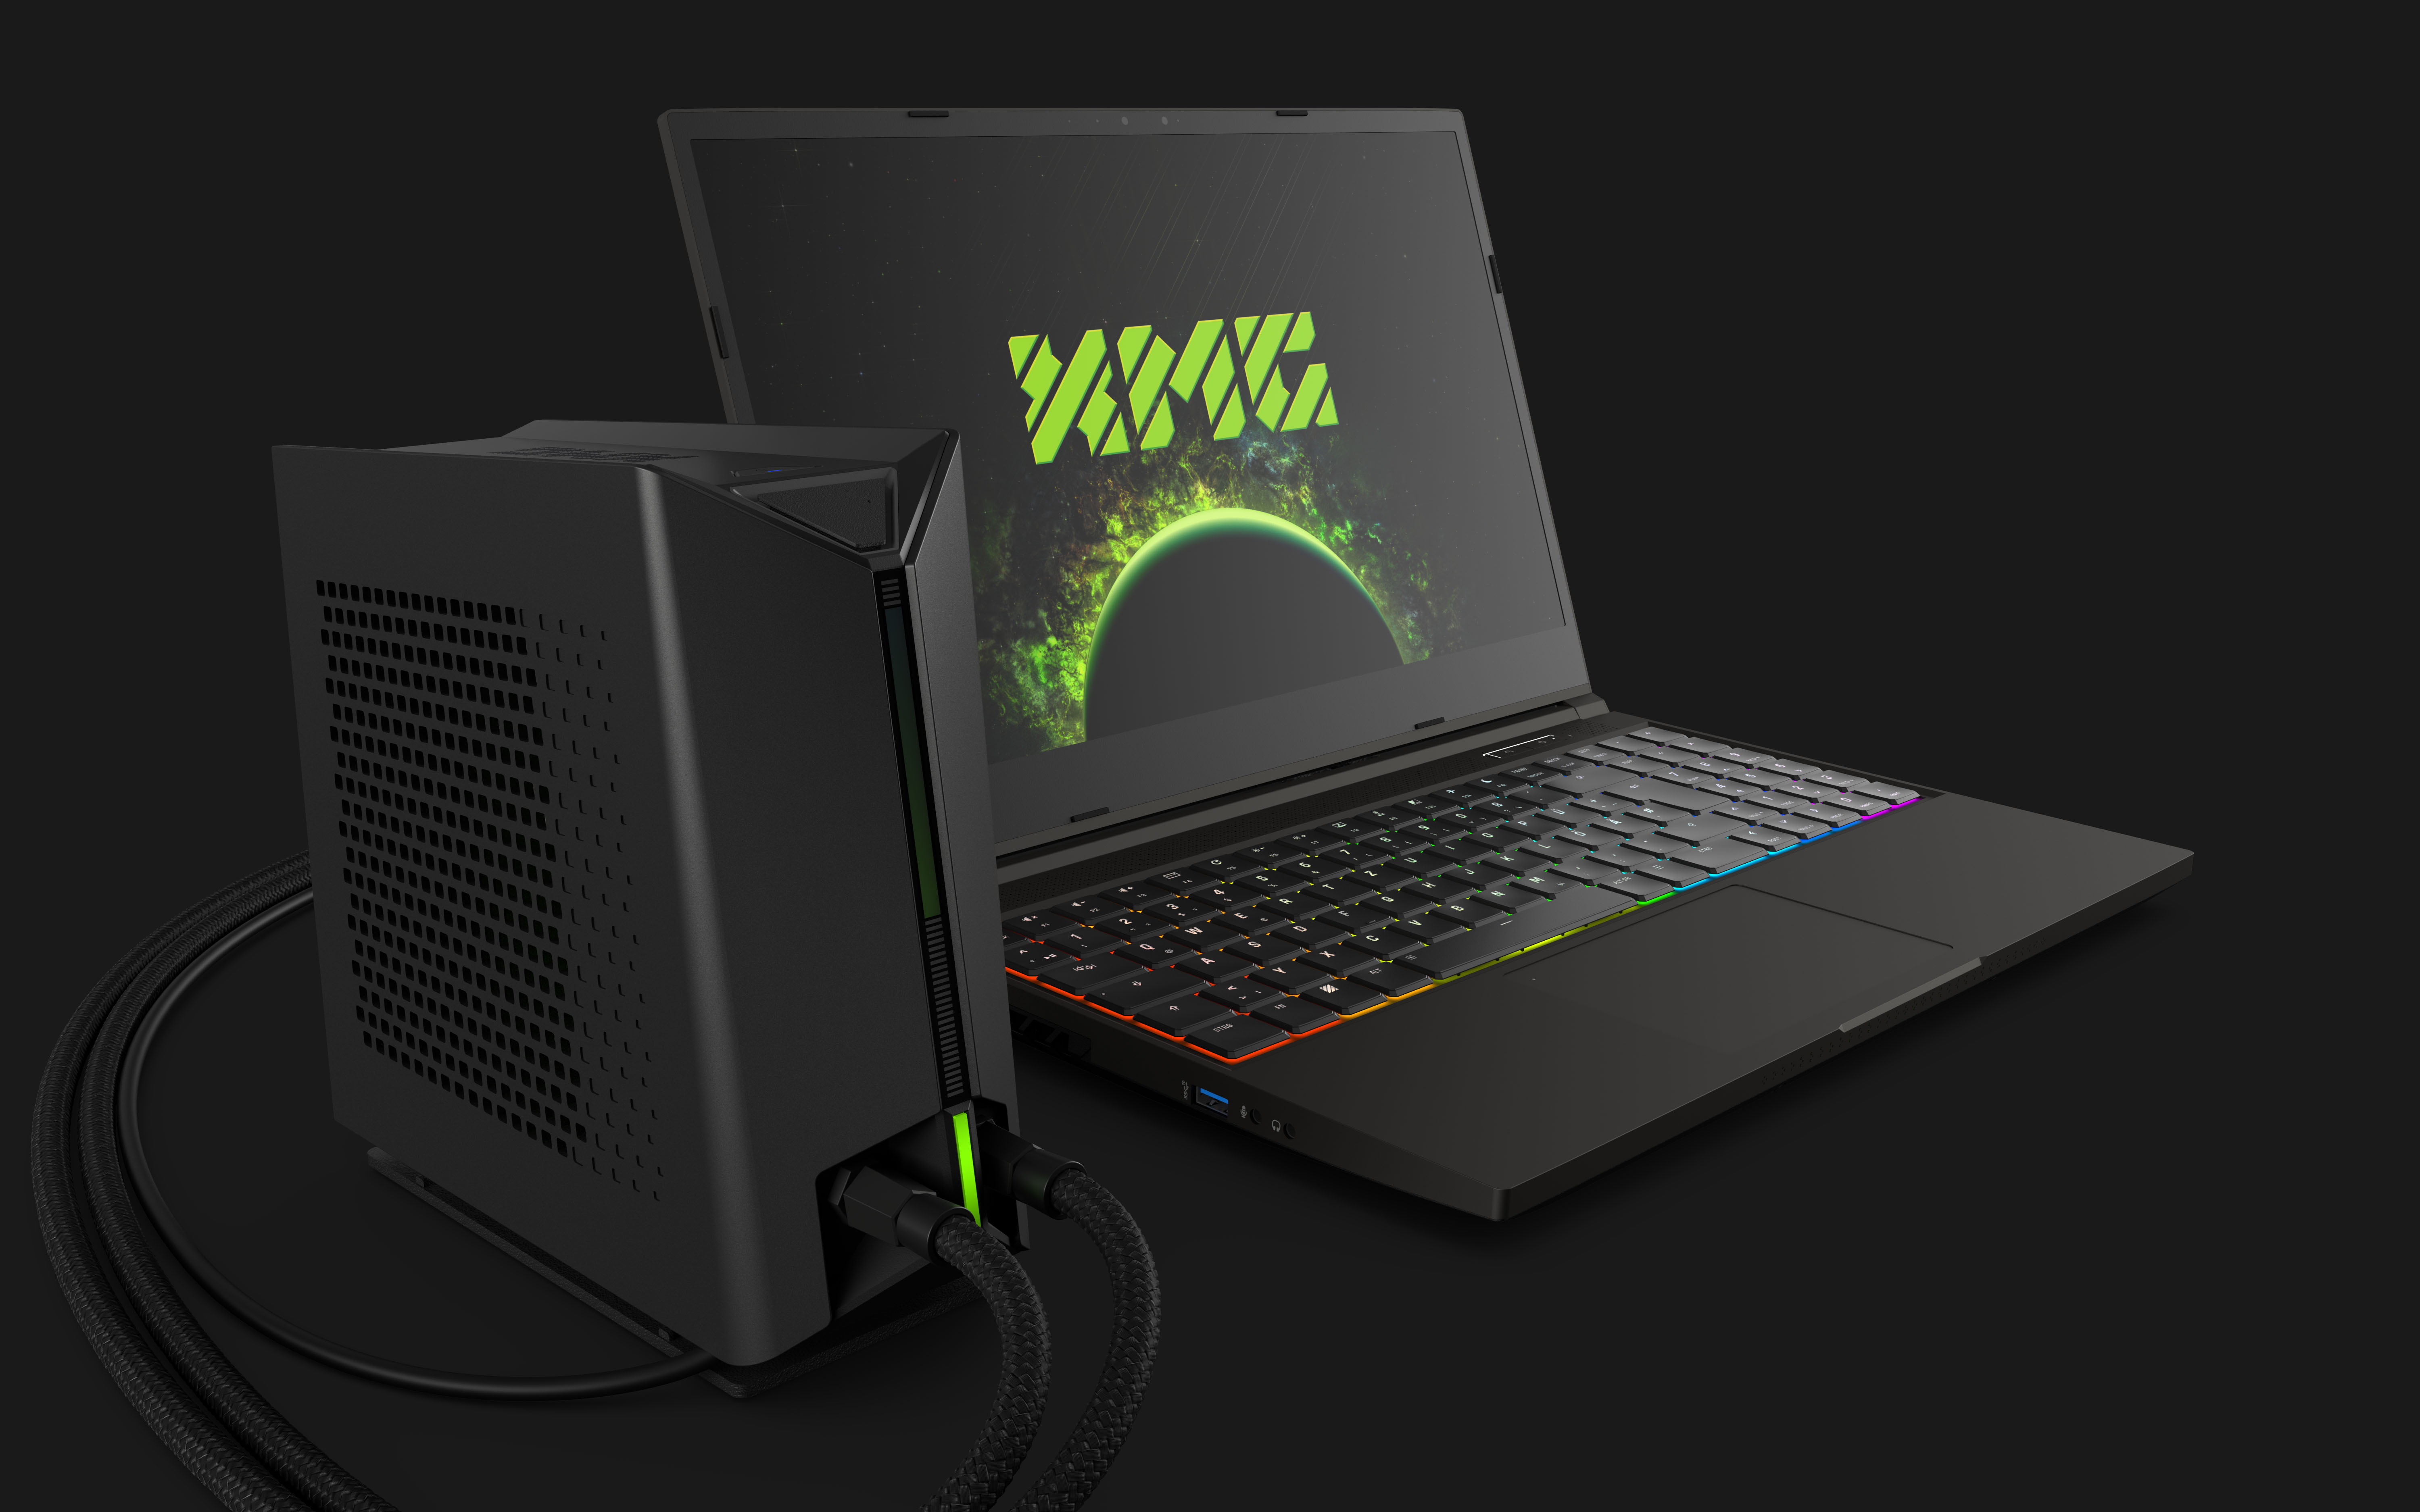 The XMG Neo 15 laptop hooked up to the XMG Oasis liquid cooling system